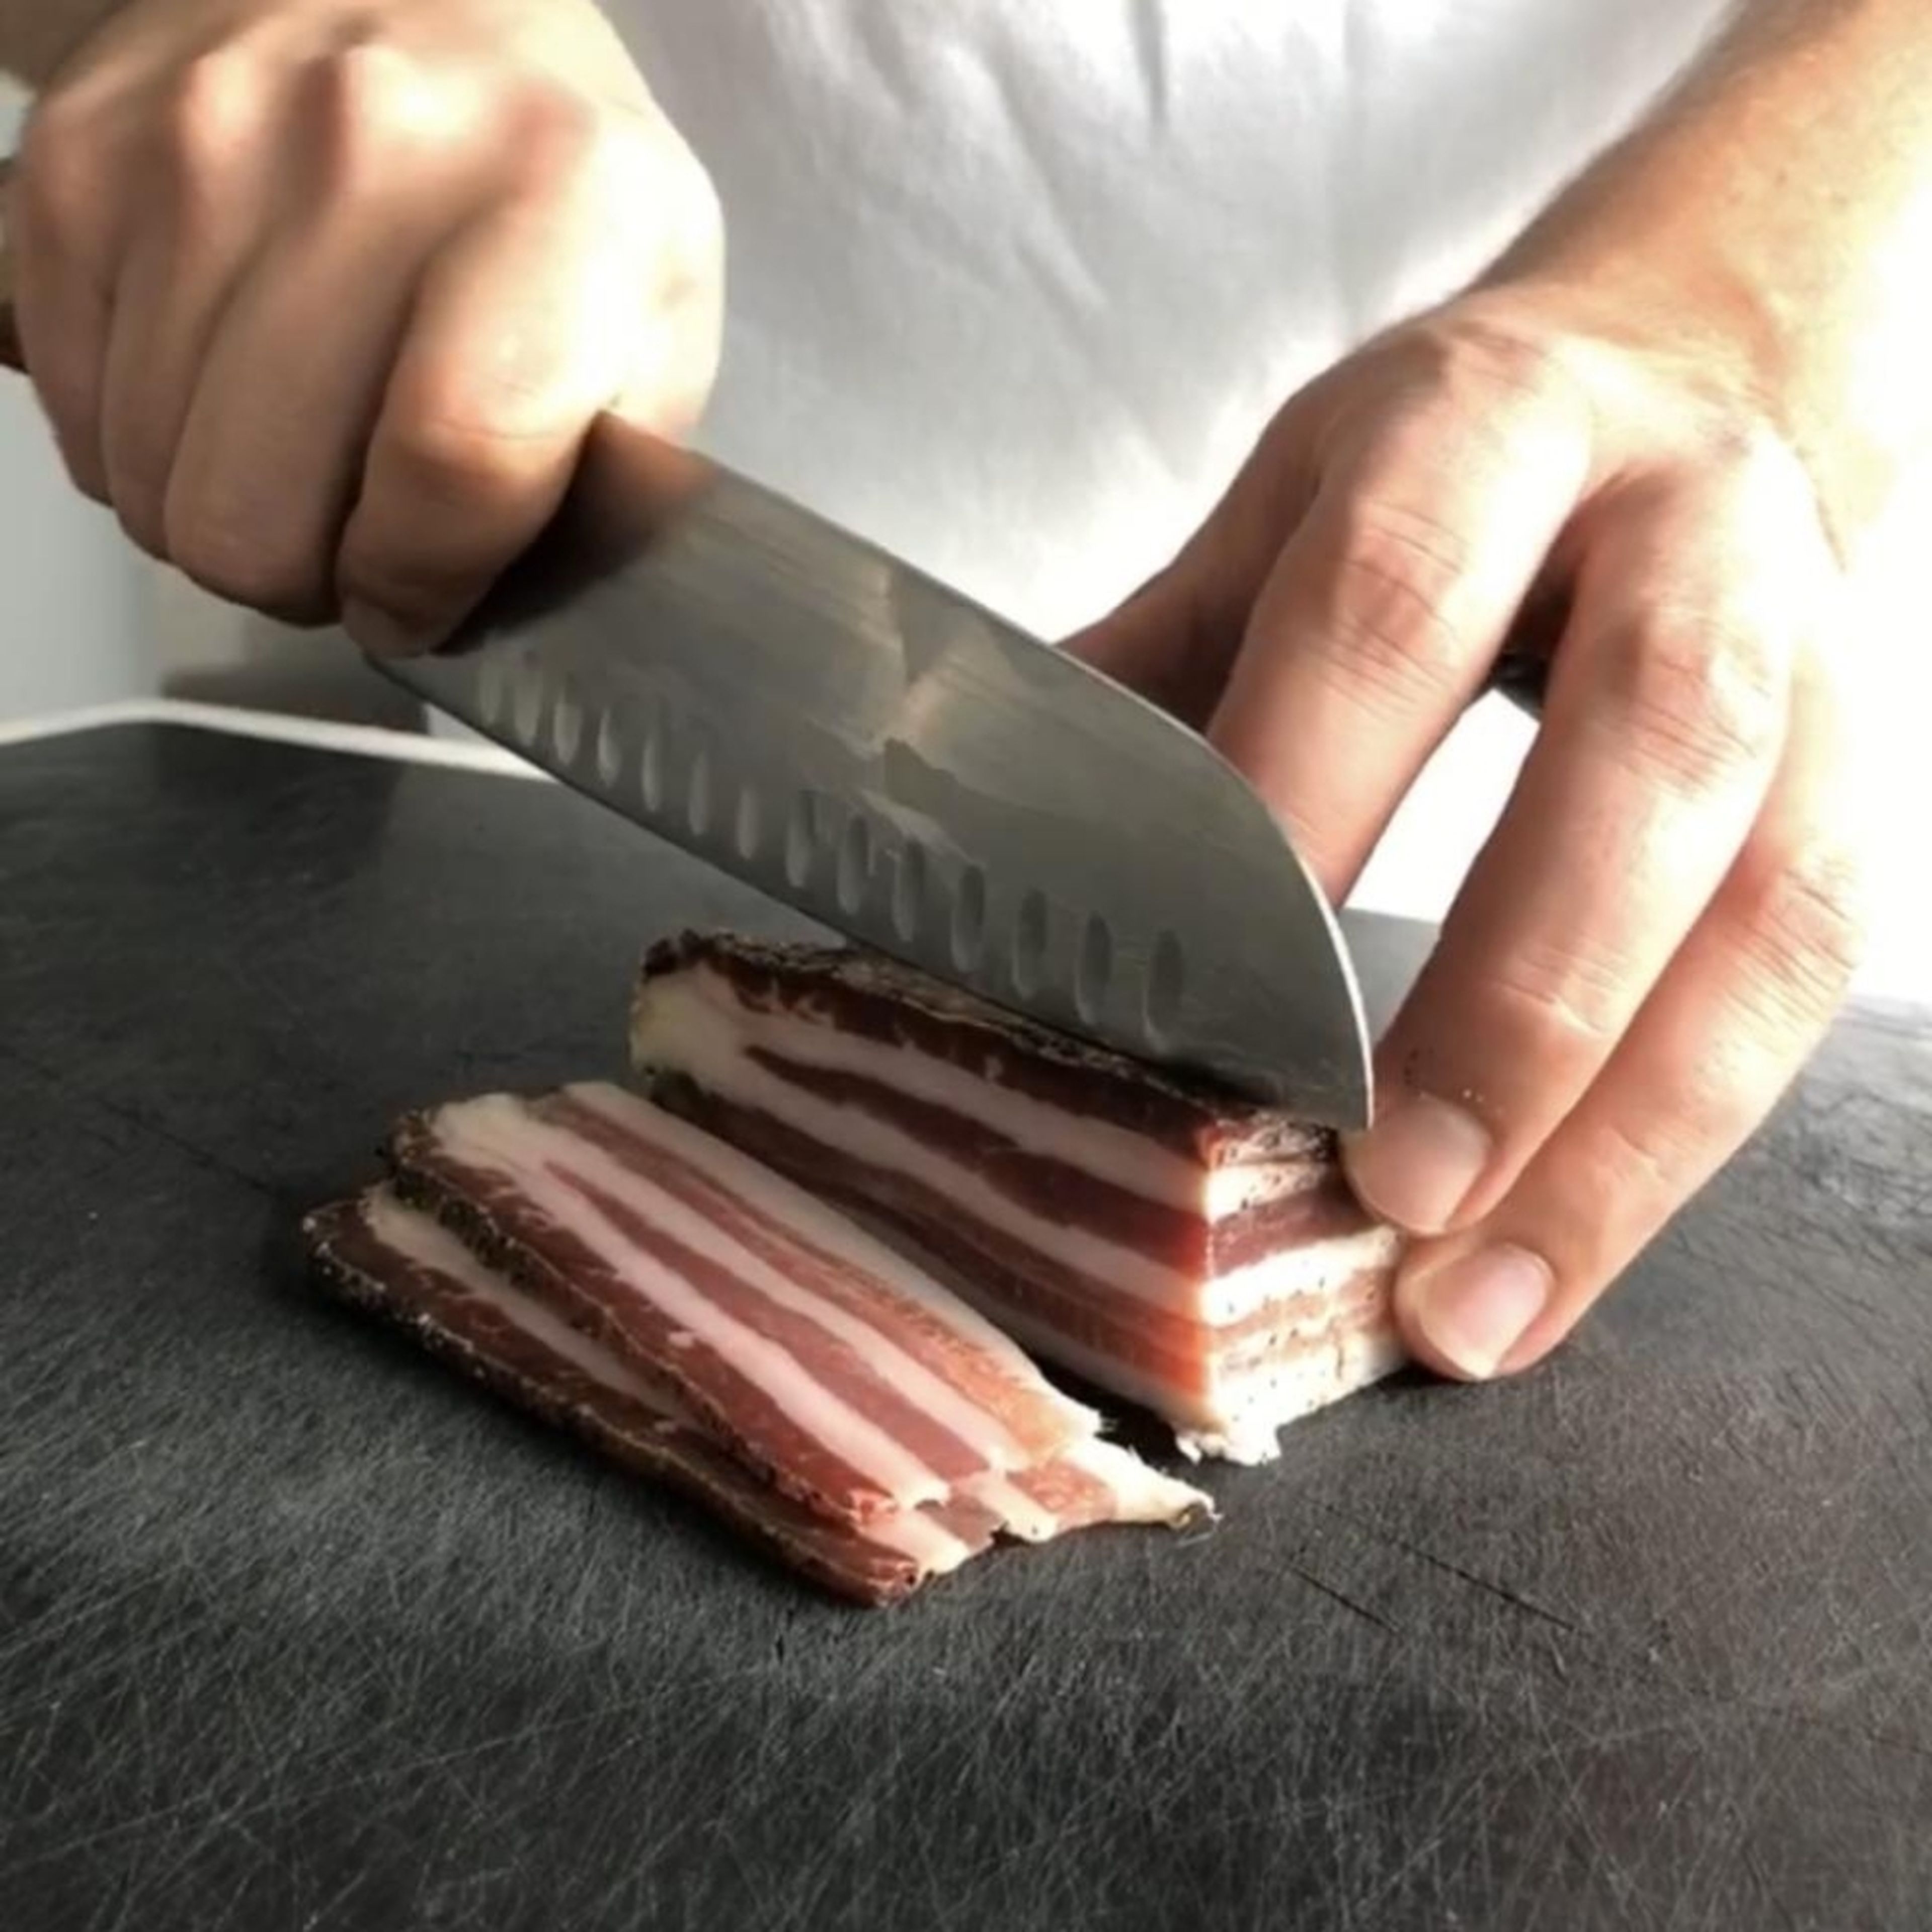 Cut the bacon into narrow strips. Now chop the parsley with stems. Then finely grate the parmesan cheese.